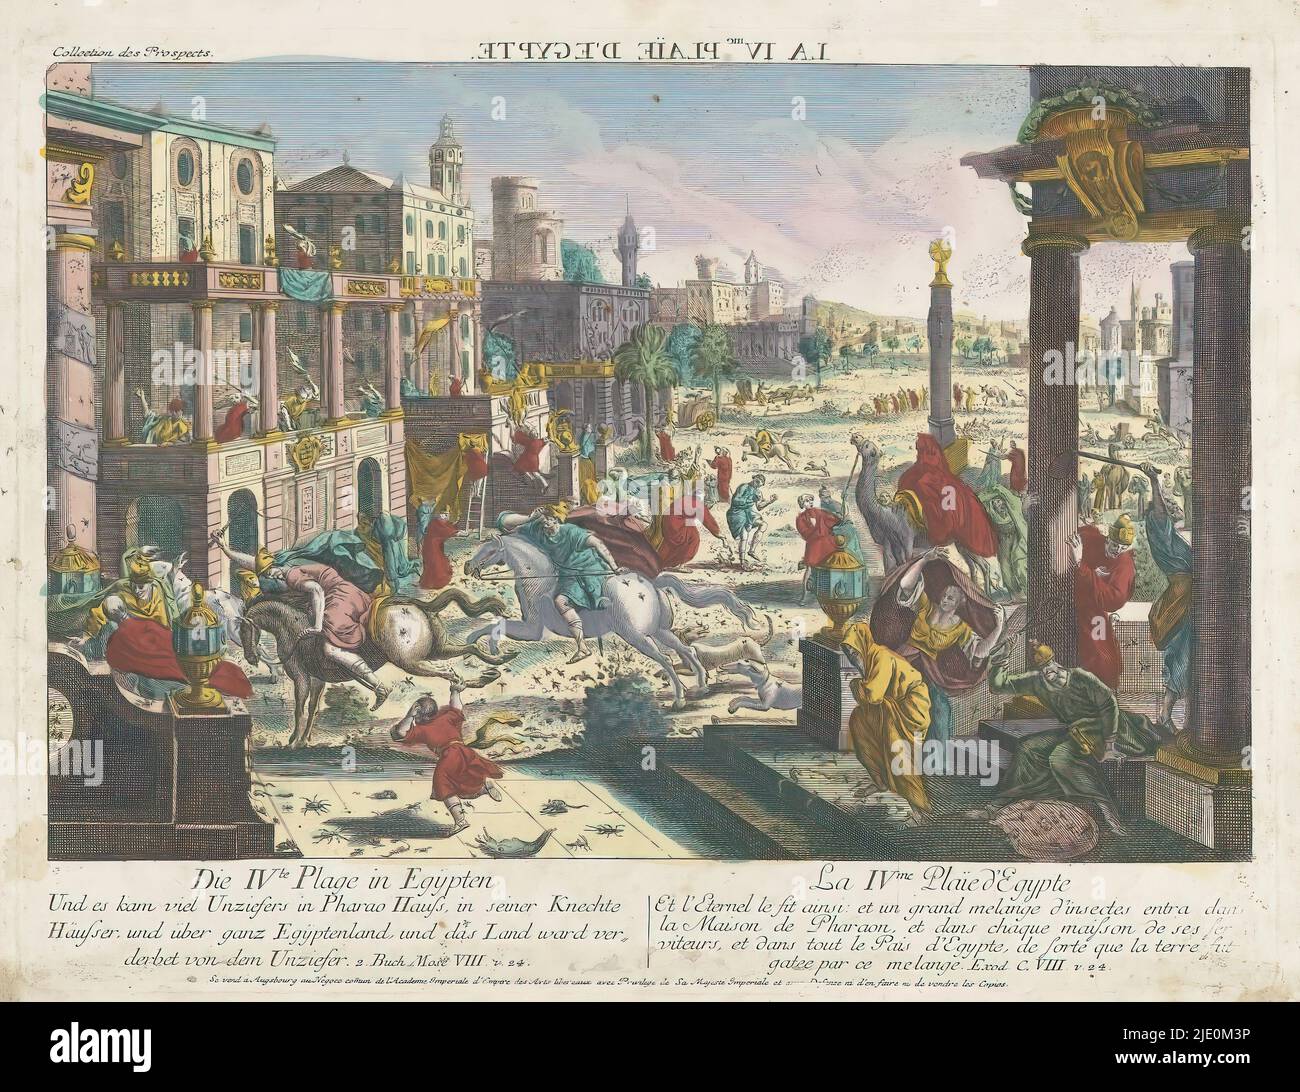 The fourth plague of Egypt, Die IVte Plage in Egypten (title on object), The plague of vermin. View of a square in a city where people and horsemen are running around and beating around the bush. Everywhere is crawling with insects Under the image explanations in German and French., publisher: Kaiserlich Franziskische Akademie, (mentioned on object), print maker: anonymous, Jozef II (Duits keizer), (mentioned on object), publisher: Augsburg, print maker: Germany, 1755 - 1779, paper, etching, brush, height 332 mm × width 433 mm Stock Photo